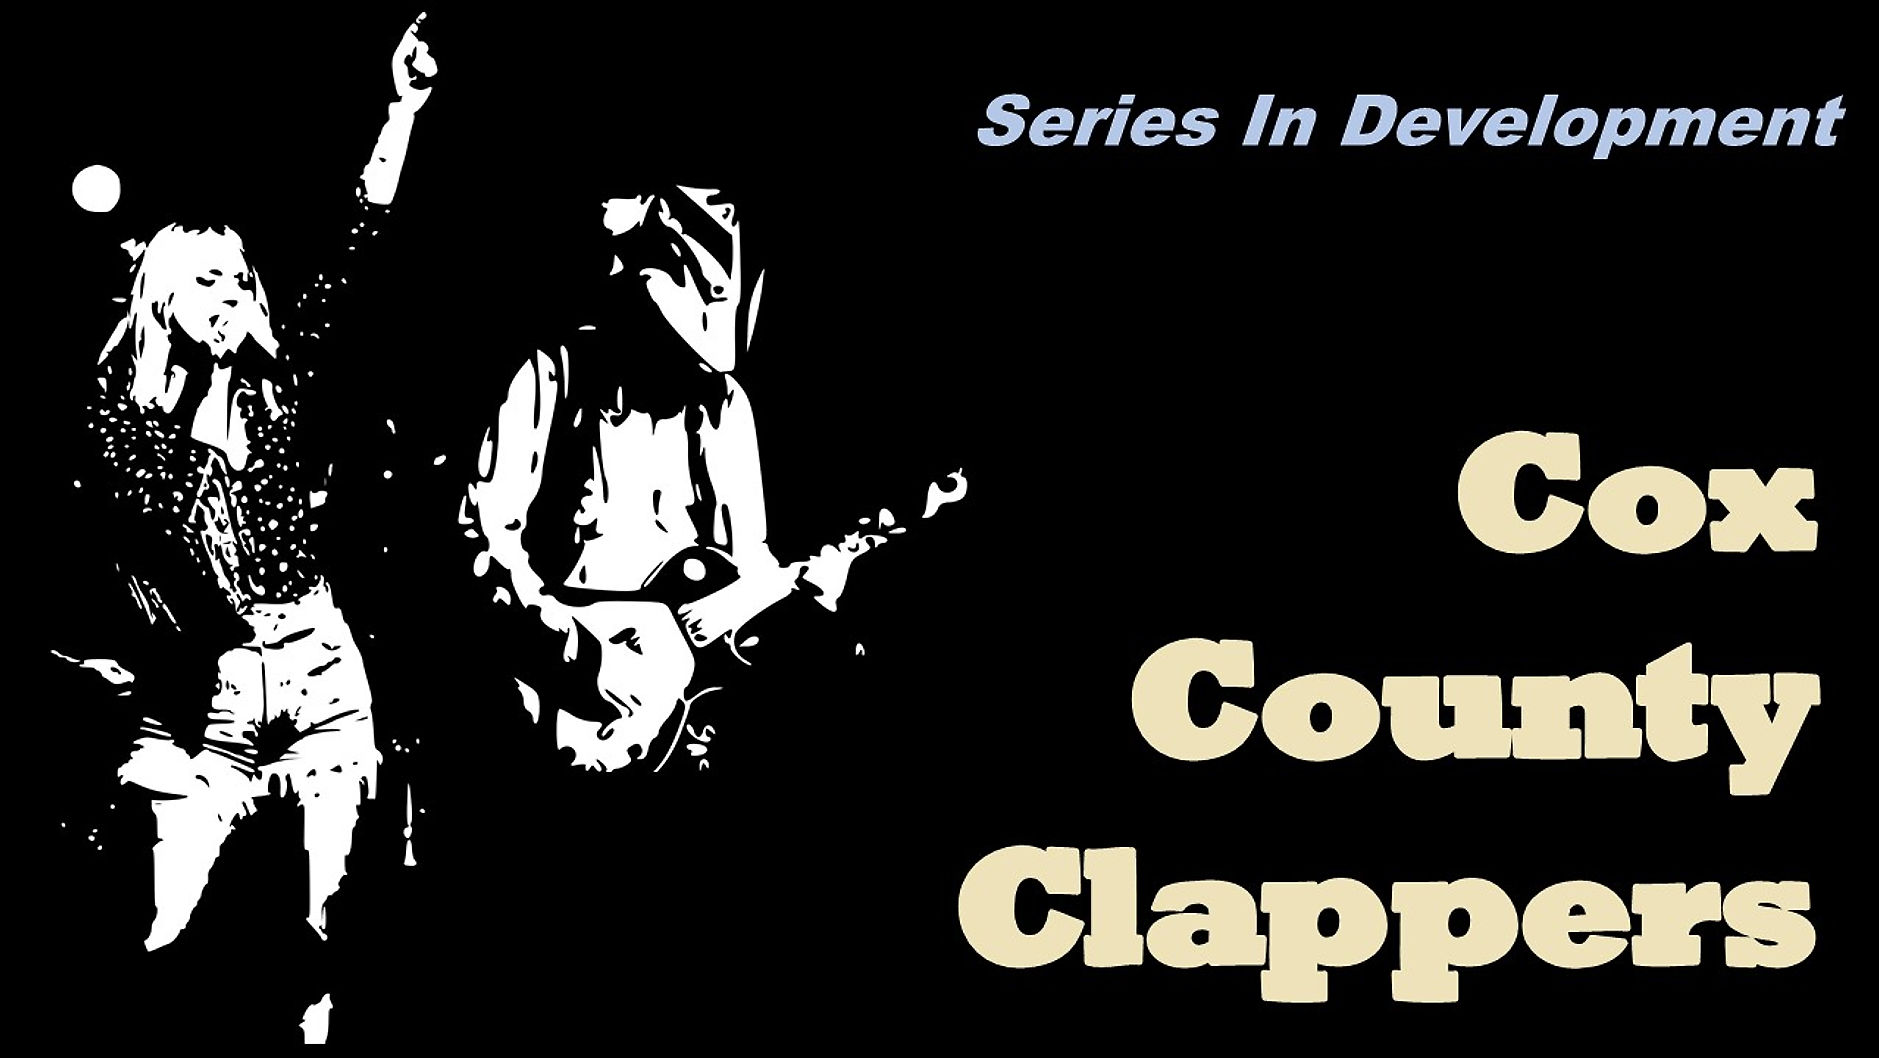 Cox County Clappers, Series